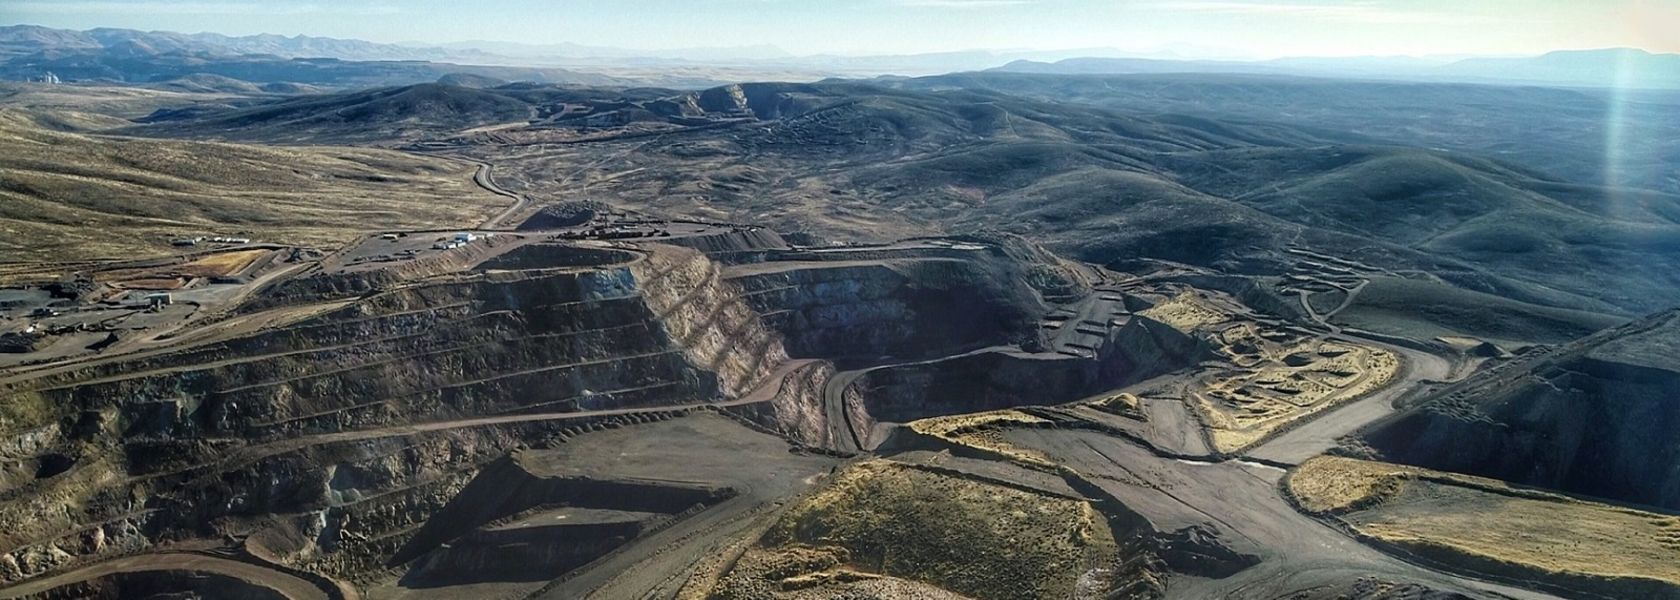 McEwen provides update on fatal accident at Gold Bar Mine in Nevada